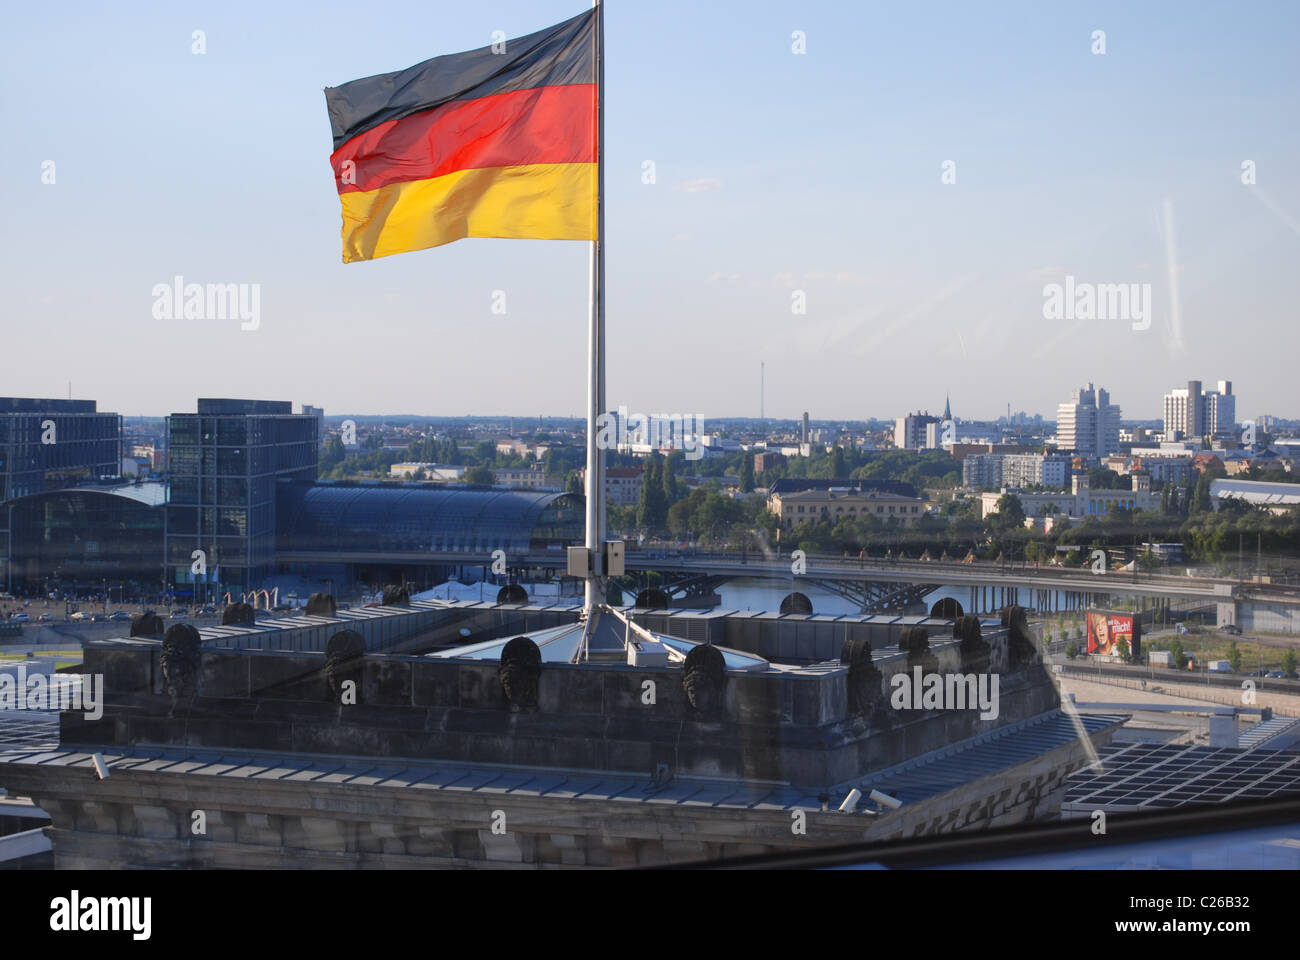 German flag by the Reichstag building Stock Photo